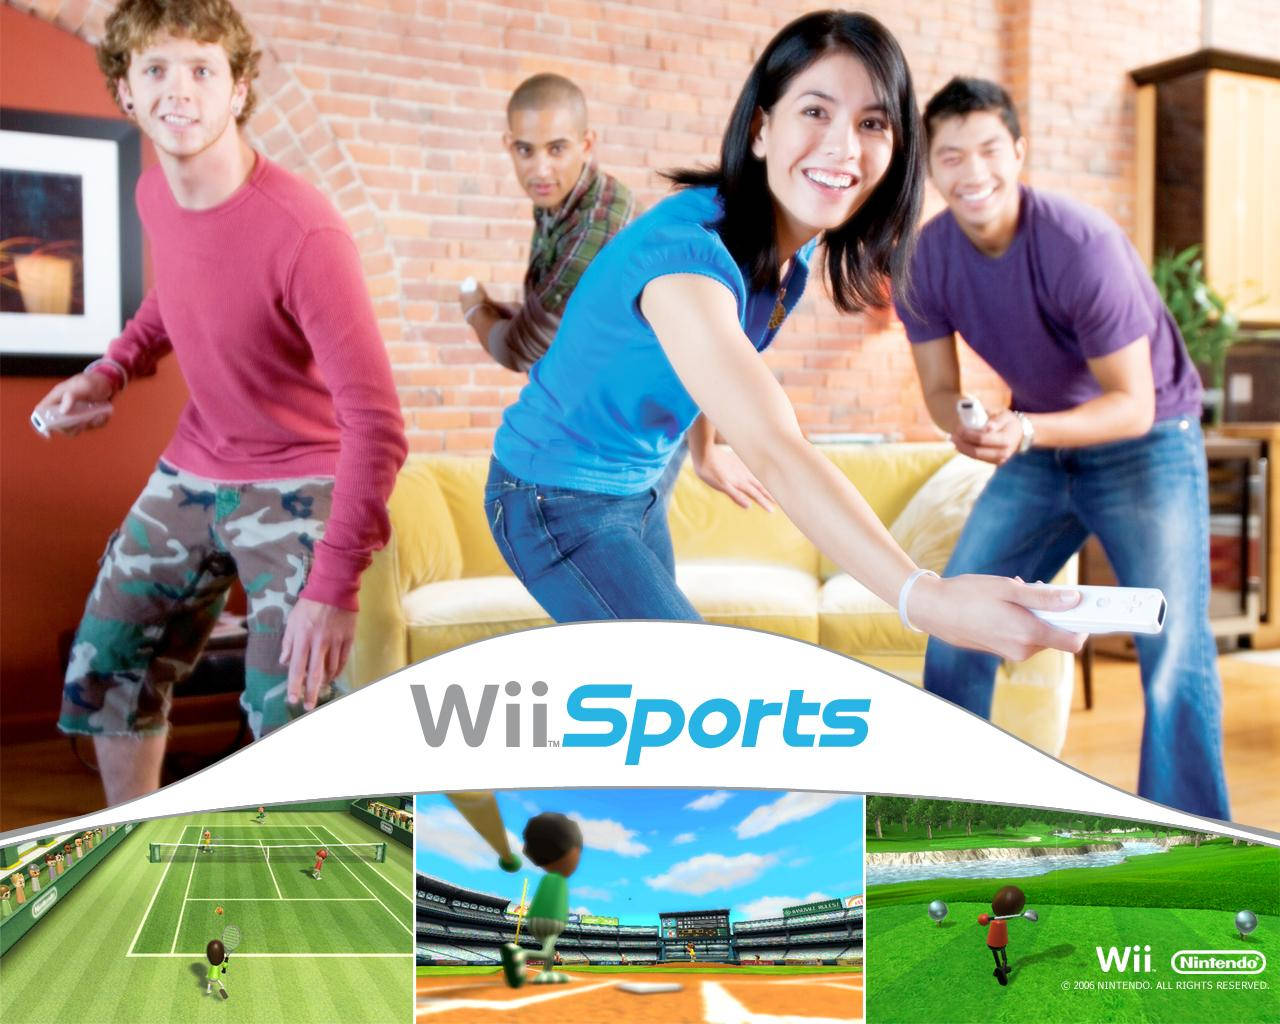 Wii Sports Video Game Players Wallpaper